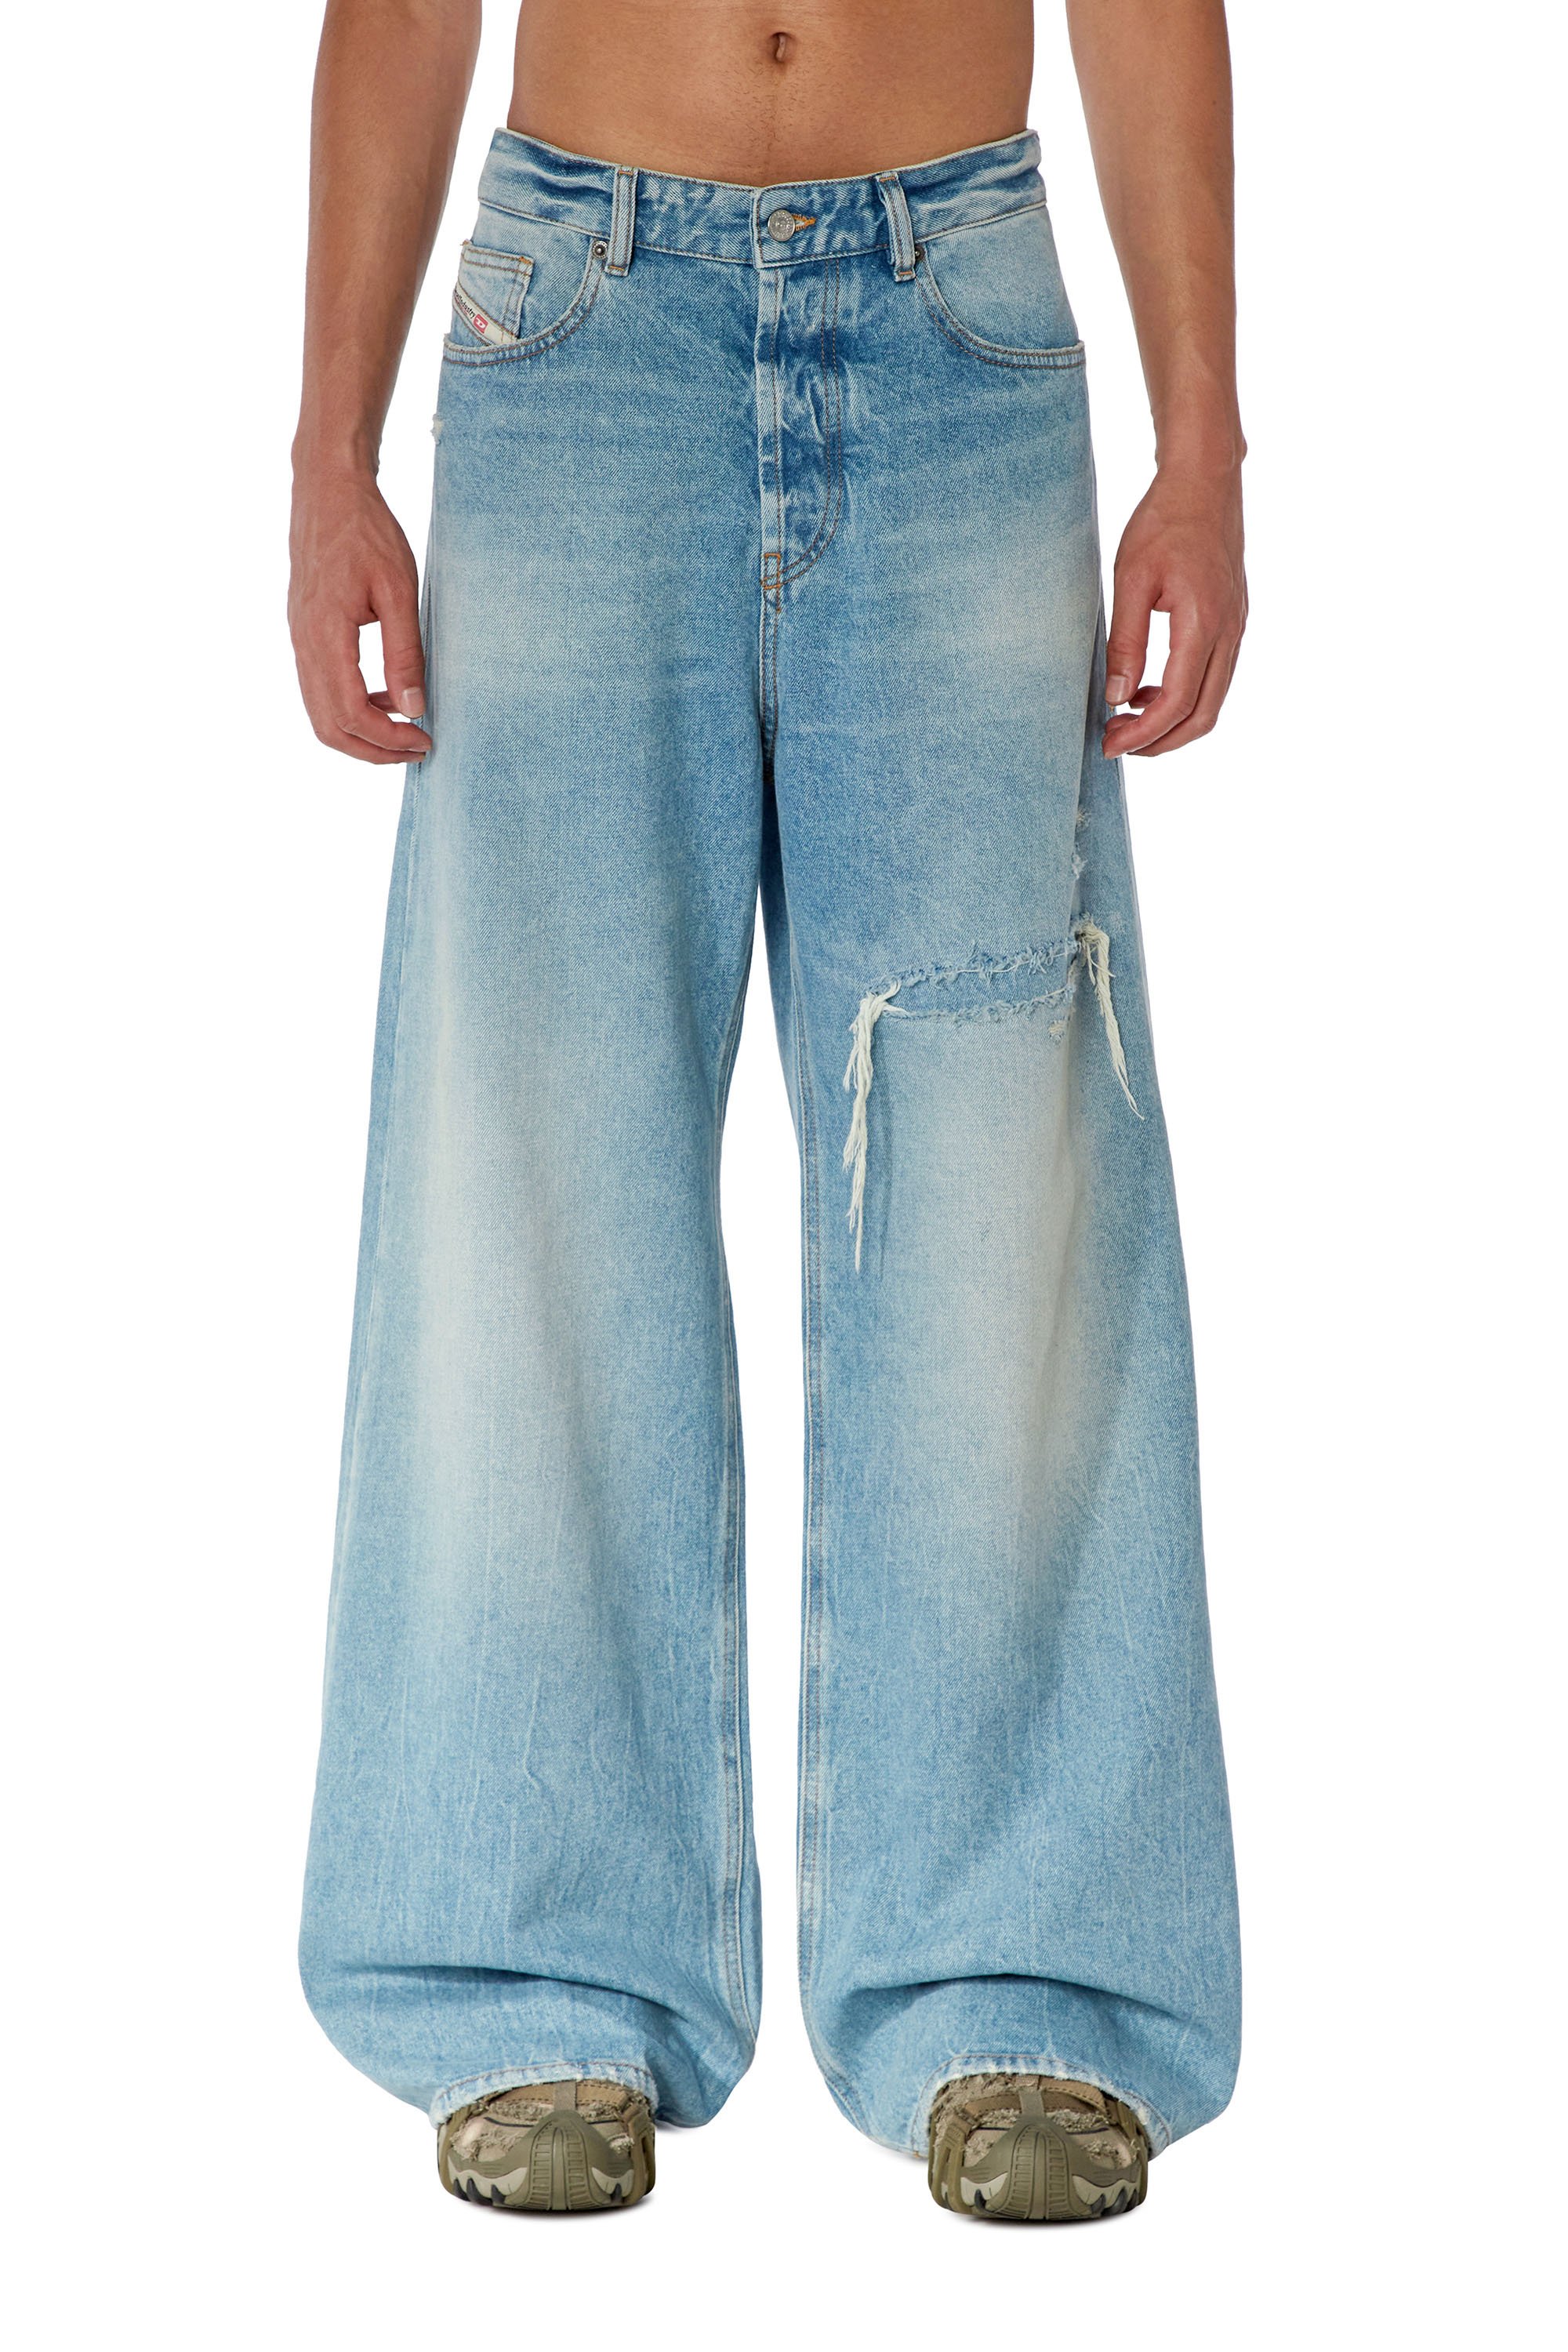 Diesel - Straight Jeans D-Rise 09E25, Hombre Straight Jeans - D-Rise in Azul marino - Image 2